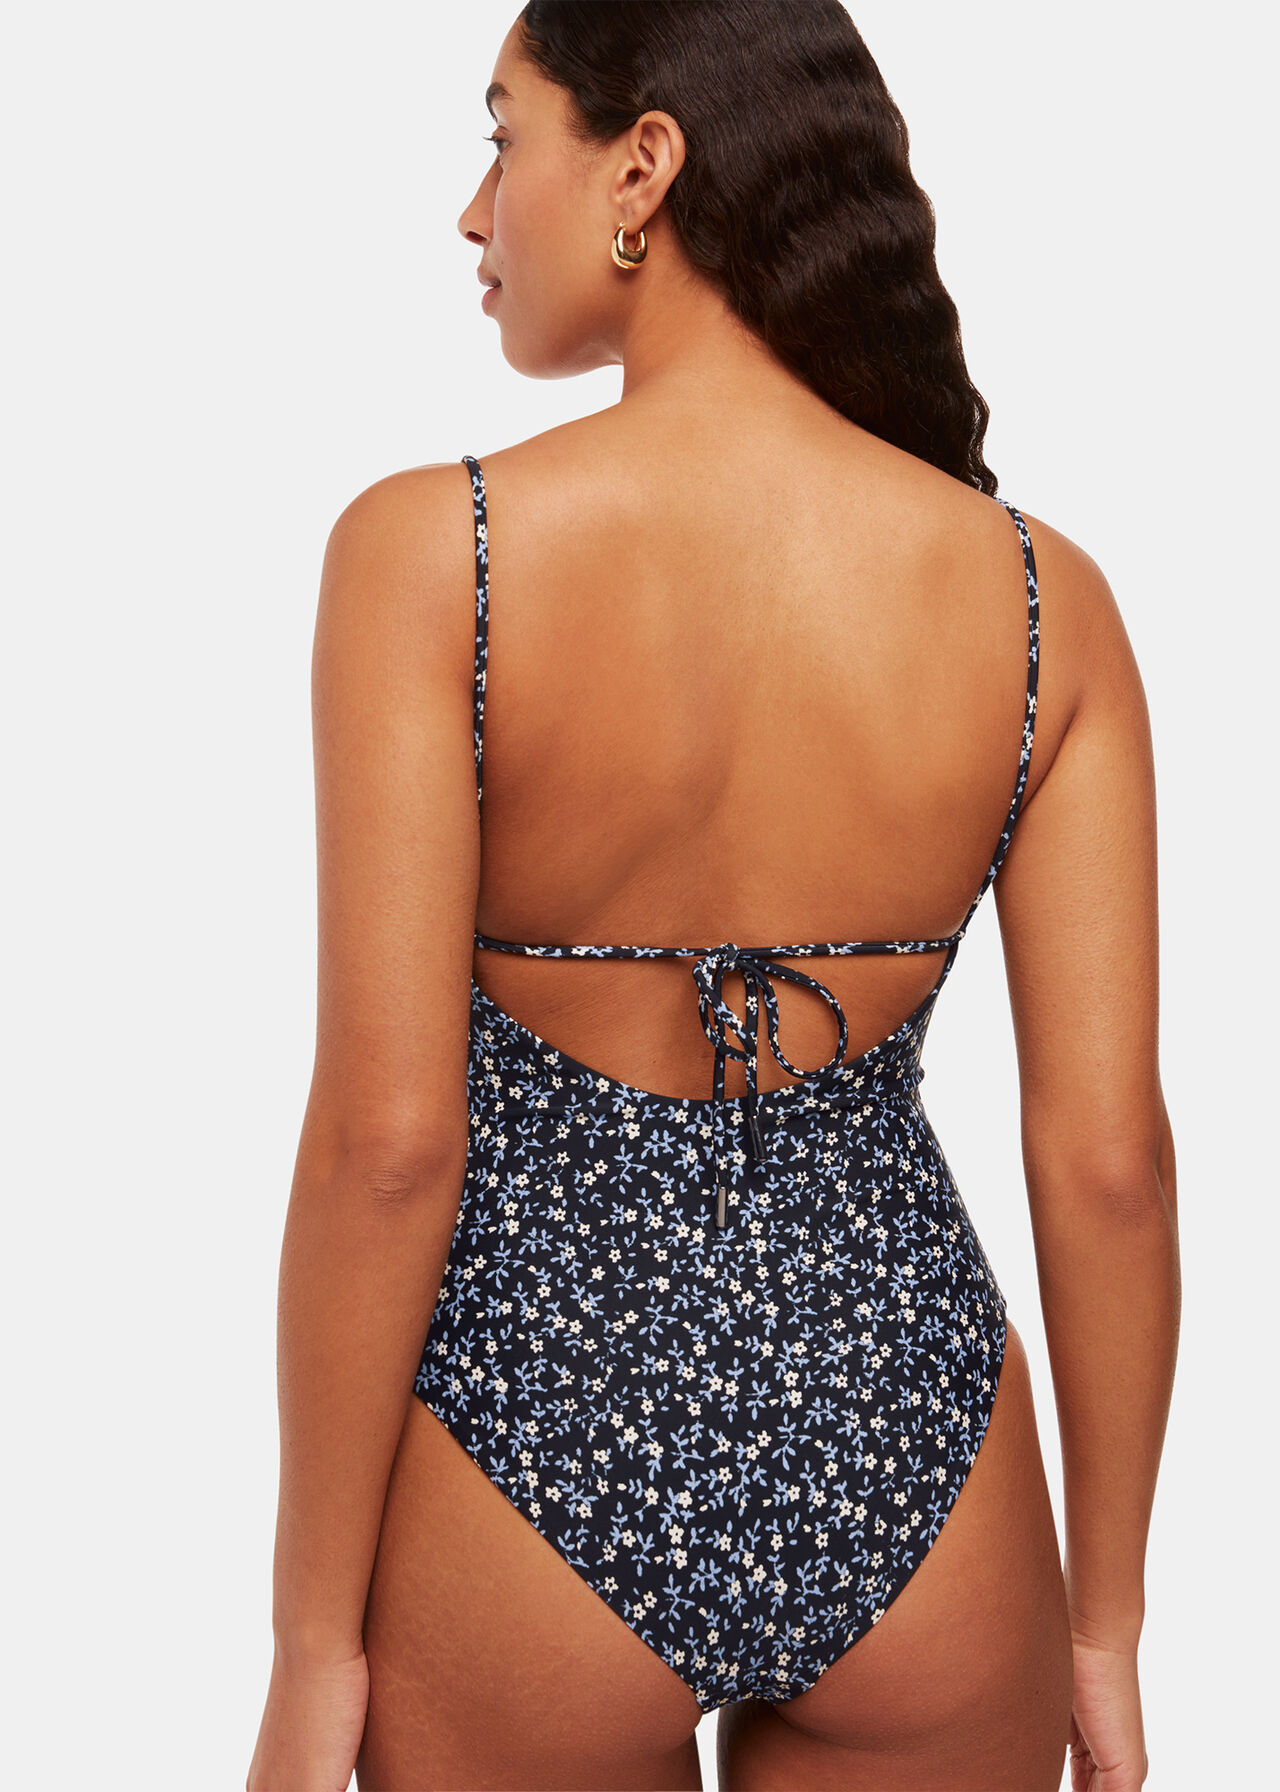 Forget Me Not Swimsuit